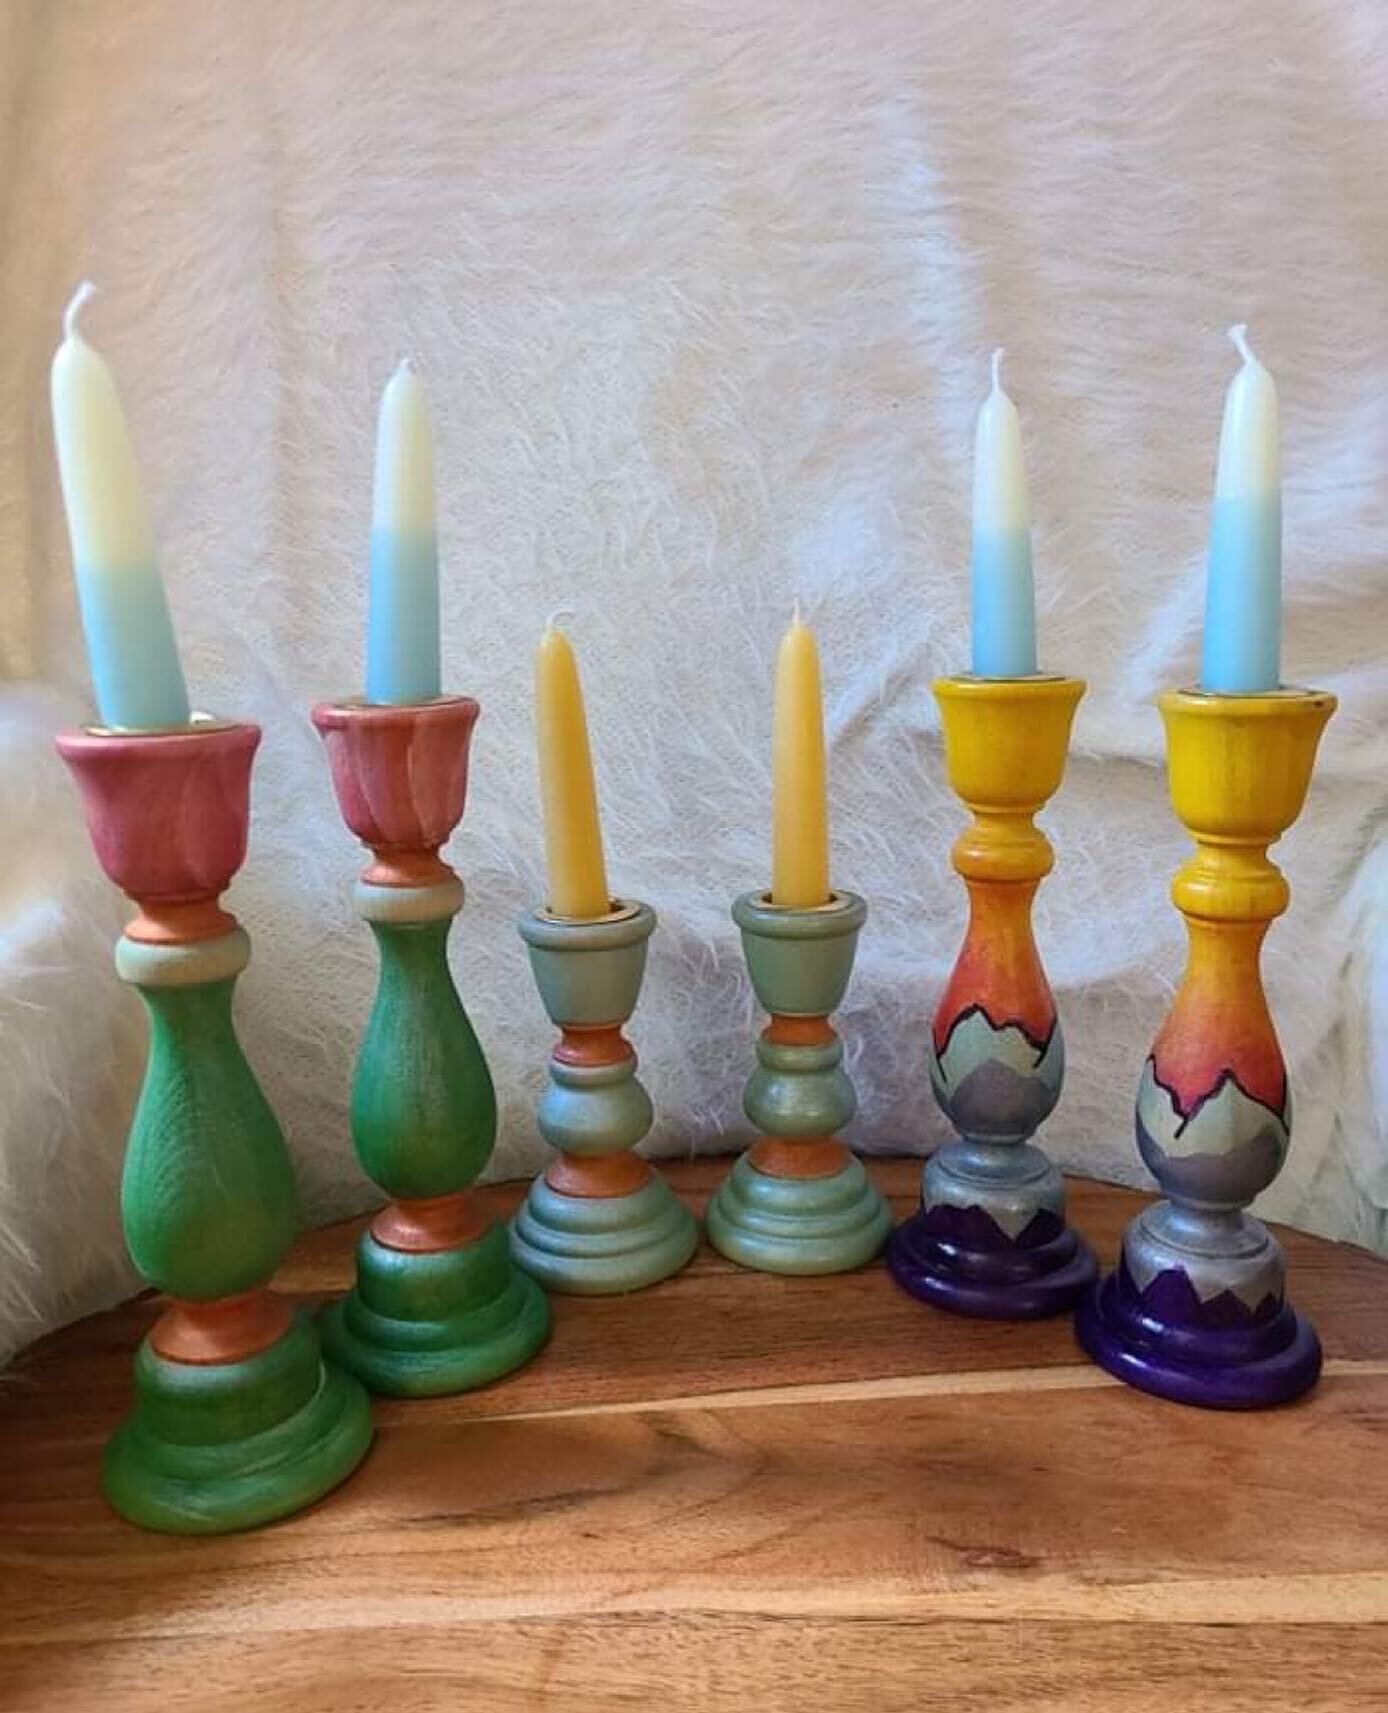 Loving these beautiful @stargazecandles in some of my new candle holders!!! 

Check out their beautiful bee&rsquo;s wax candles, especially their Hannukah packs!!! 

(Image description coming soon will be pinned in comments)